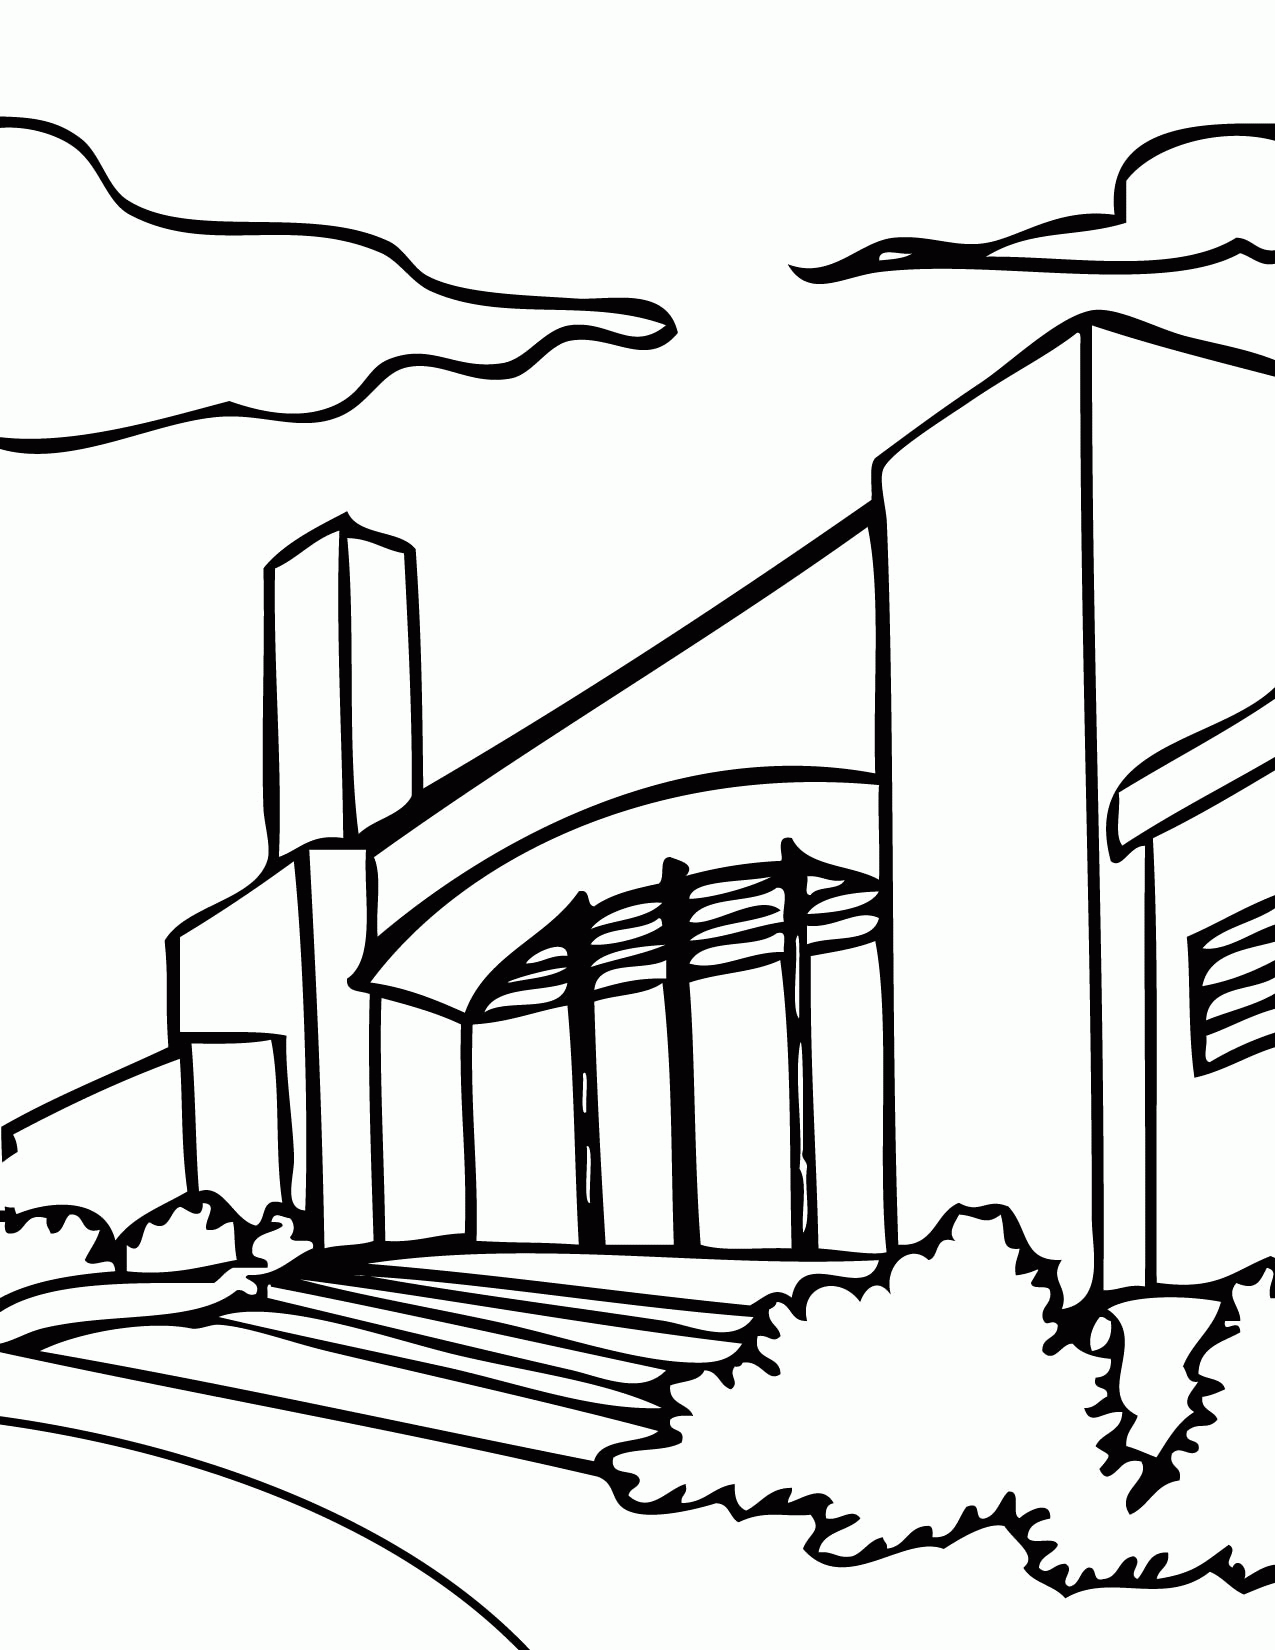 School Coloring Page - Handipoints